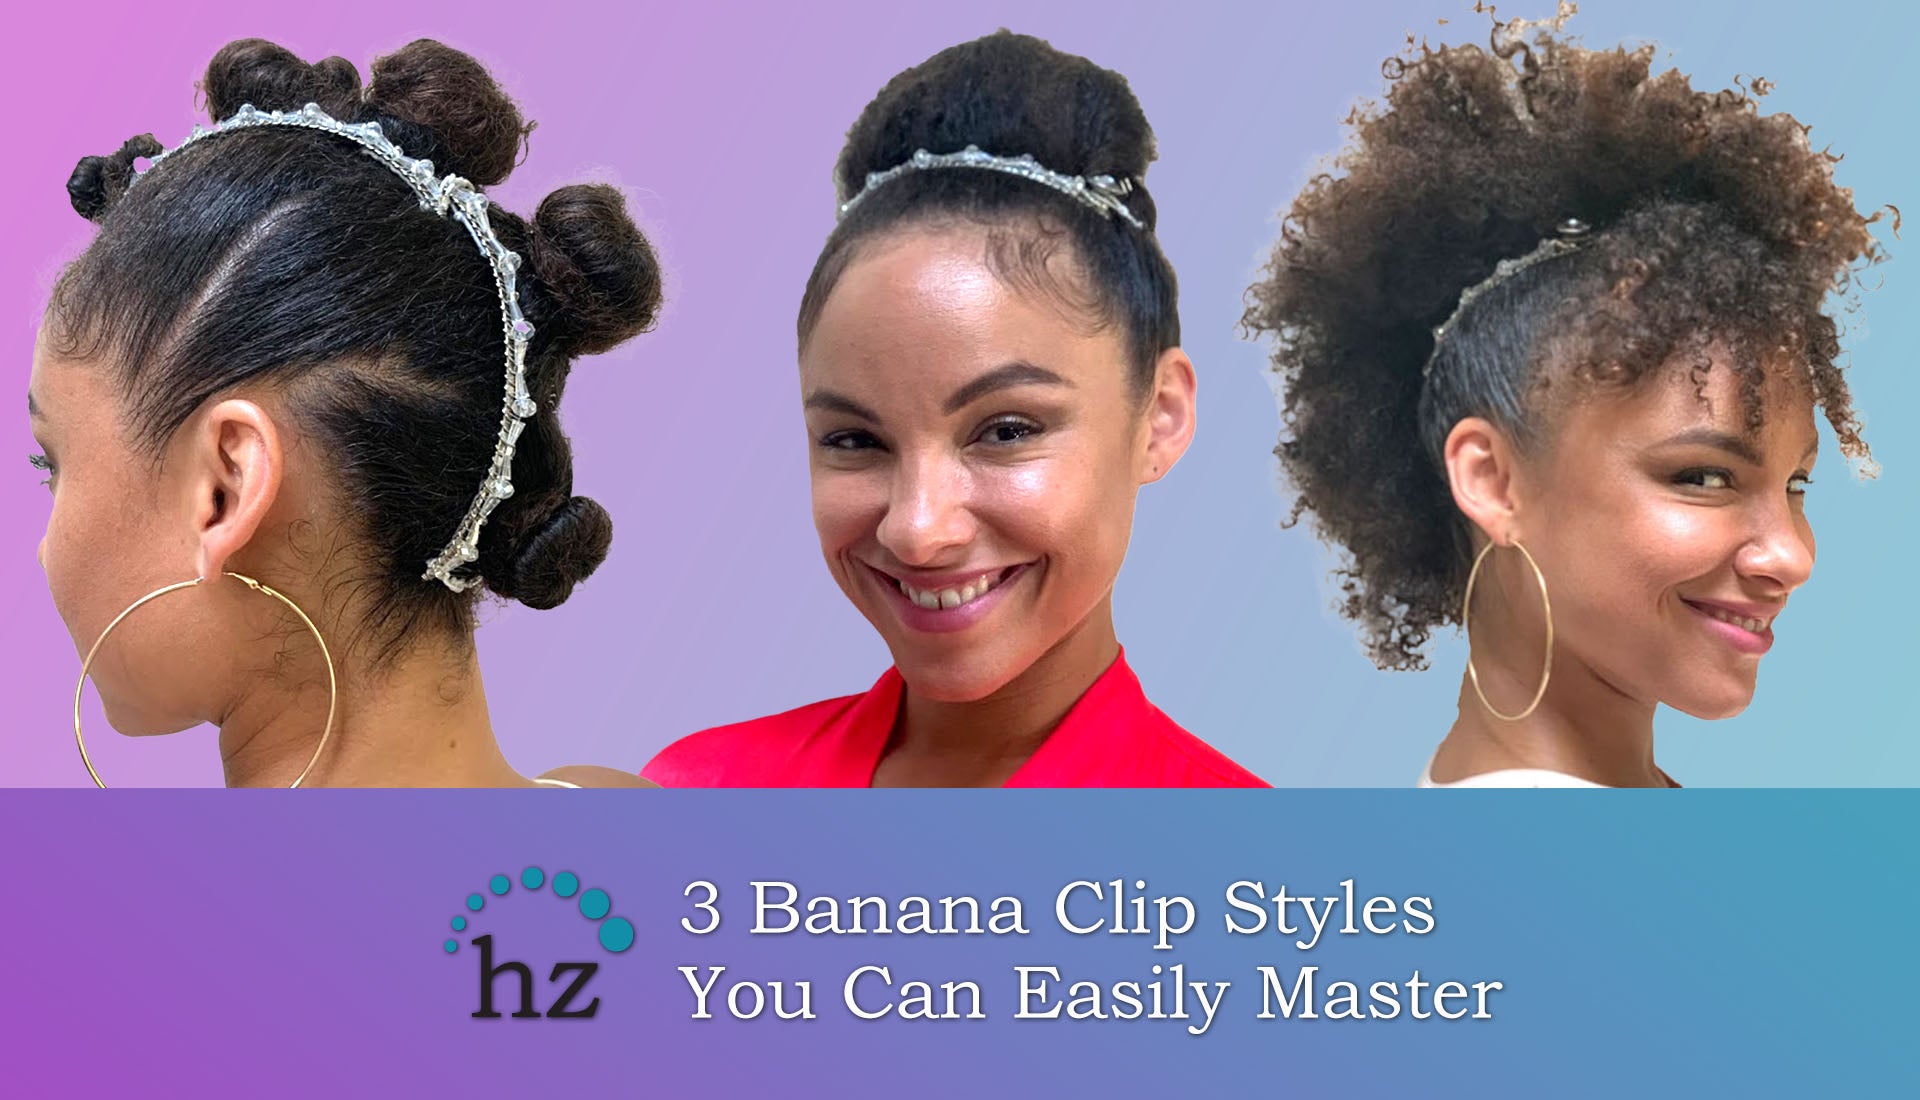 3 Banana Clip Styles To Easily Master Even with Thick Curly Hair